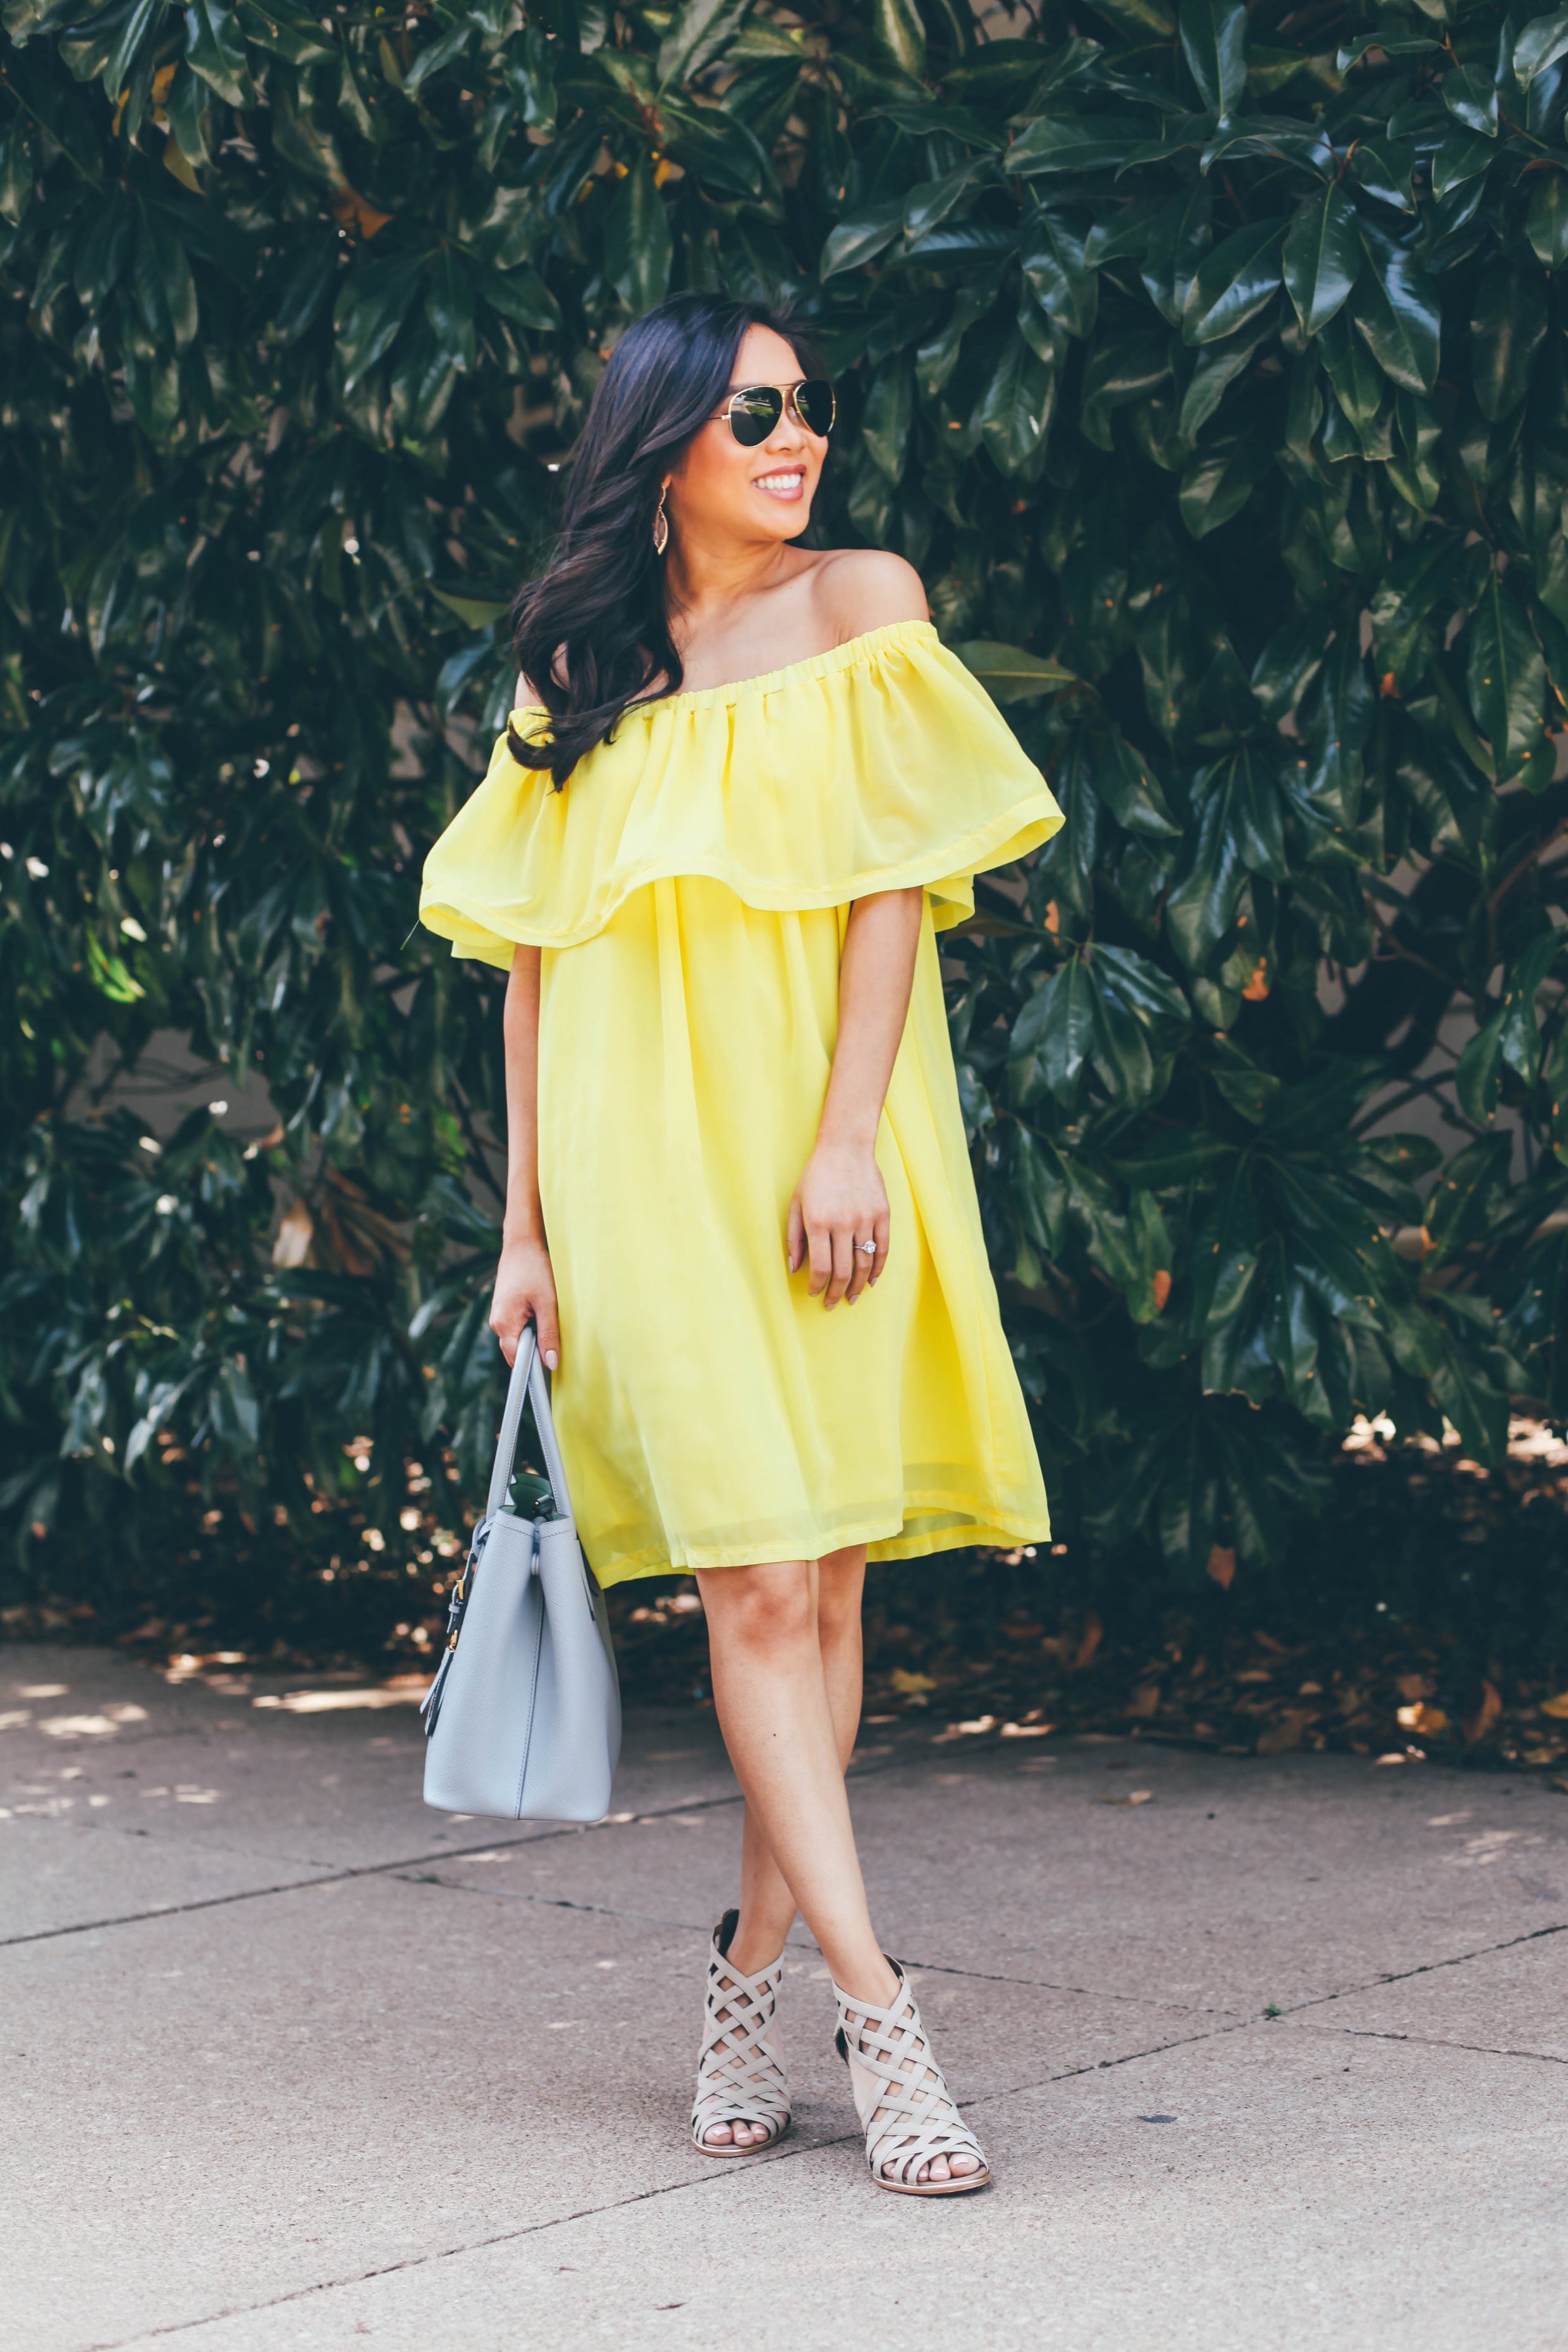 Blogger Hoang-Kim wears a yellow ruffle off the shoulder dress with booties